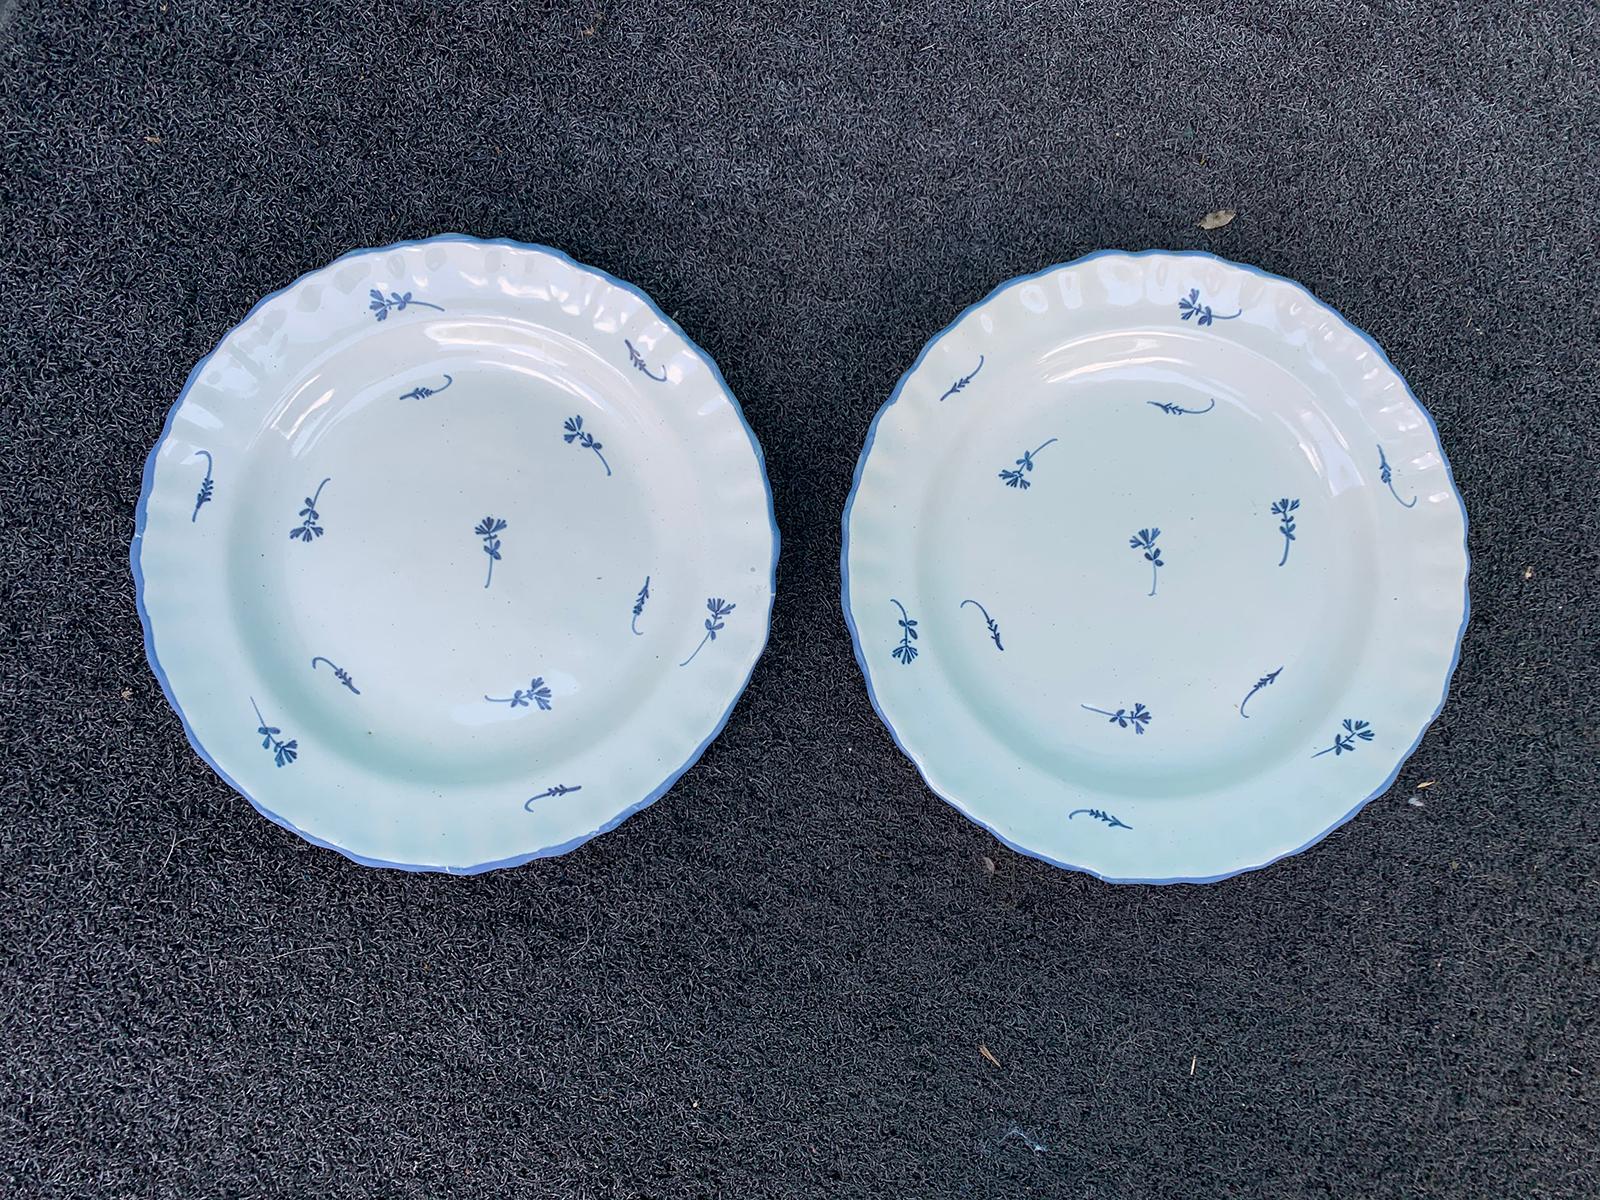 Pair of 20th century French Faience porcelain plates.